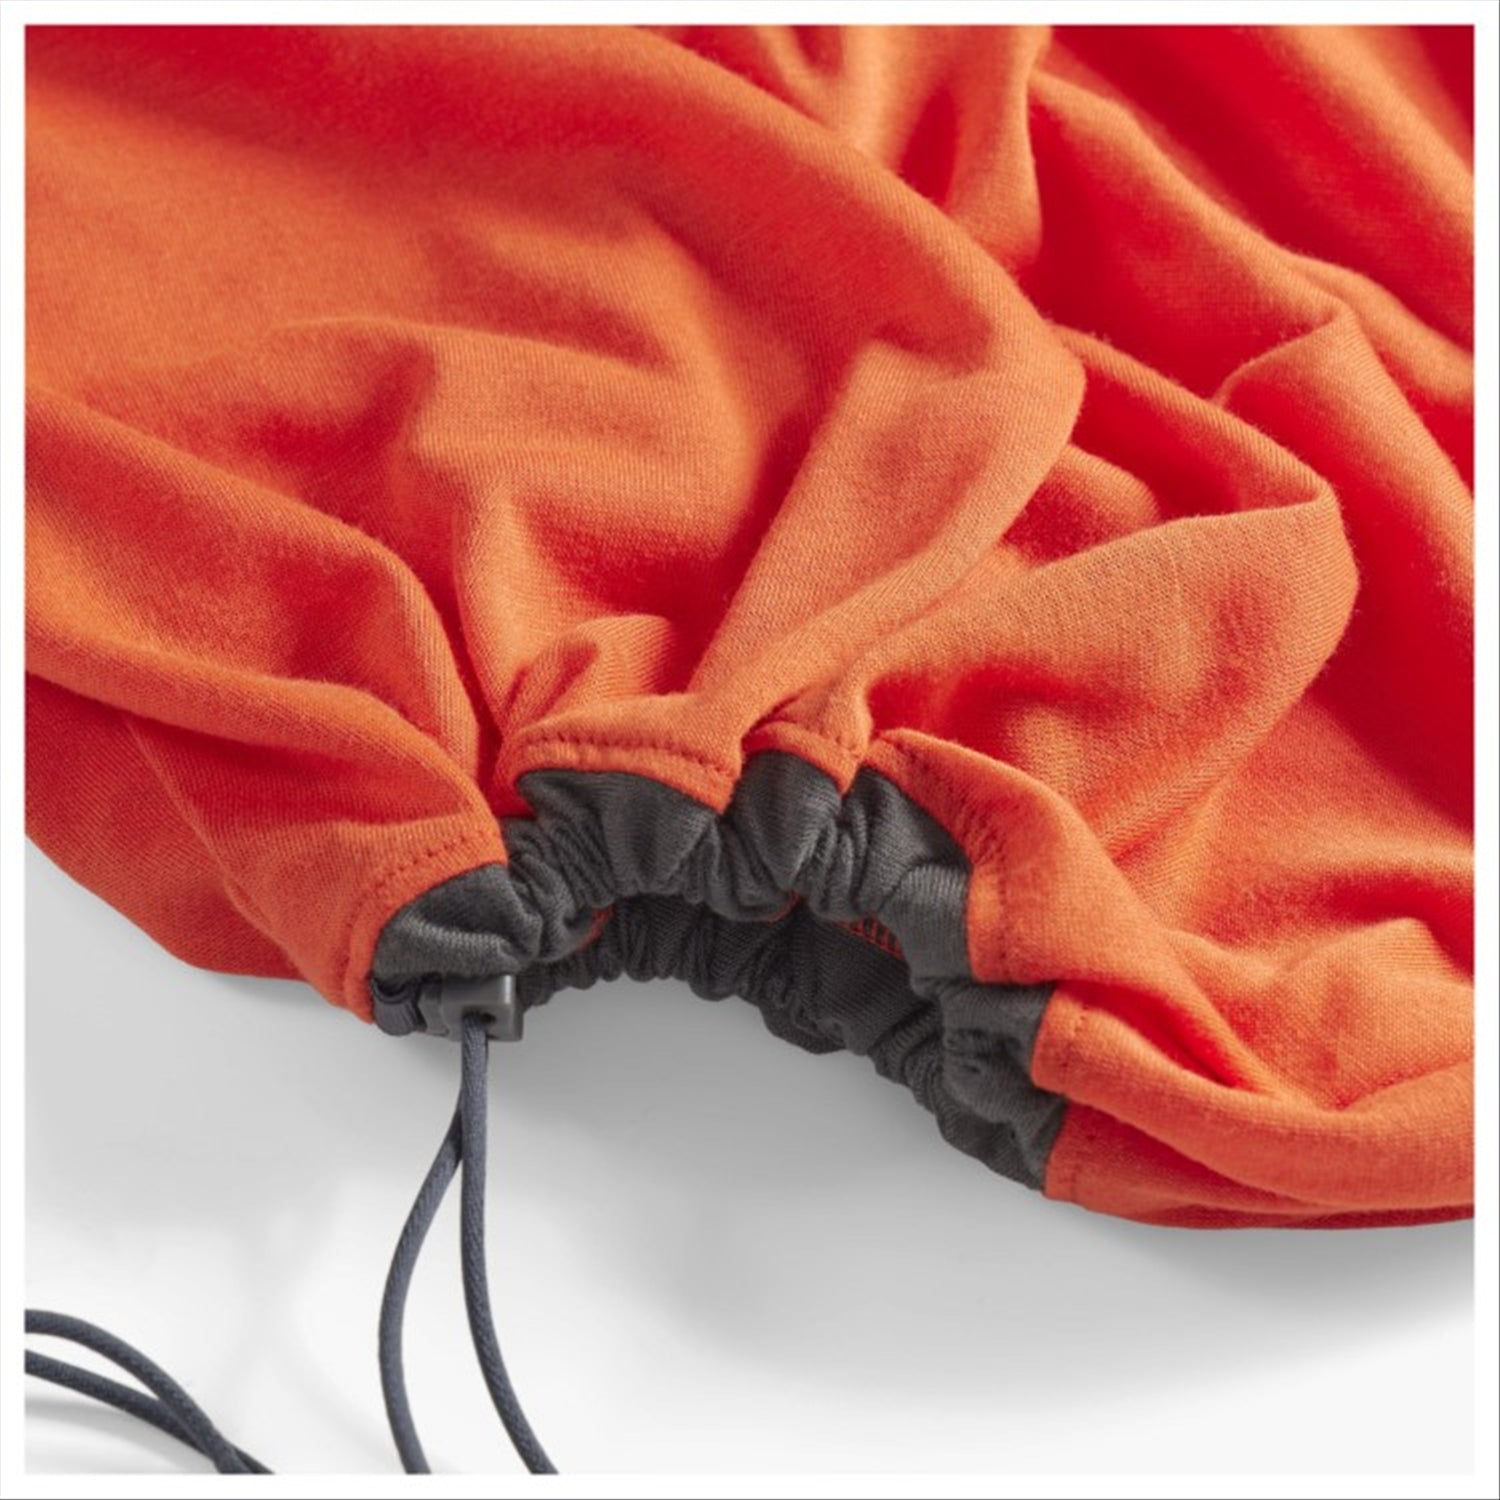 Sea to Summit Sea To Summit Reactor Extreme Sleeping Bag Liner - Mummy Shape with Drawcord